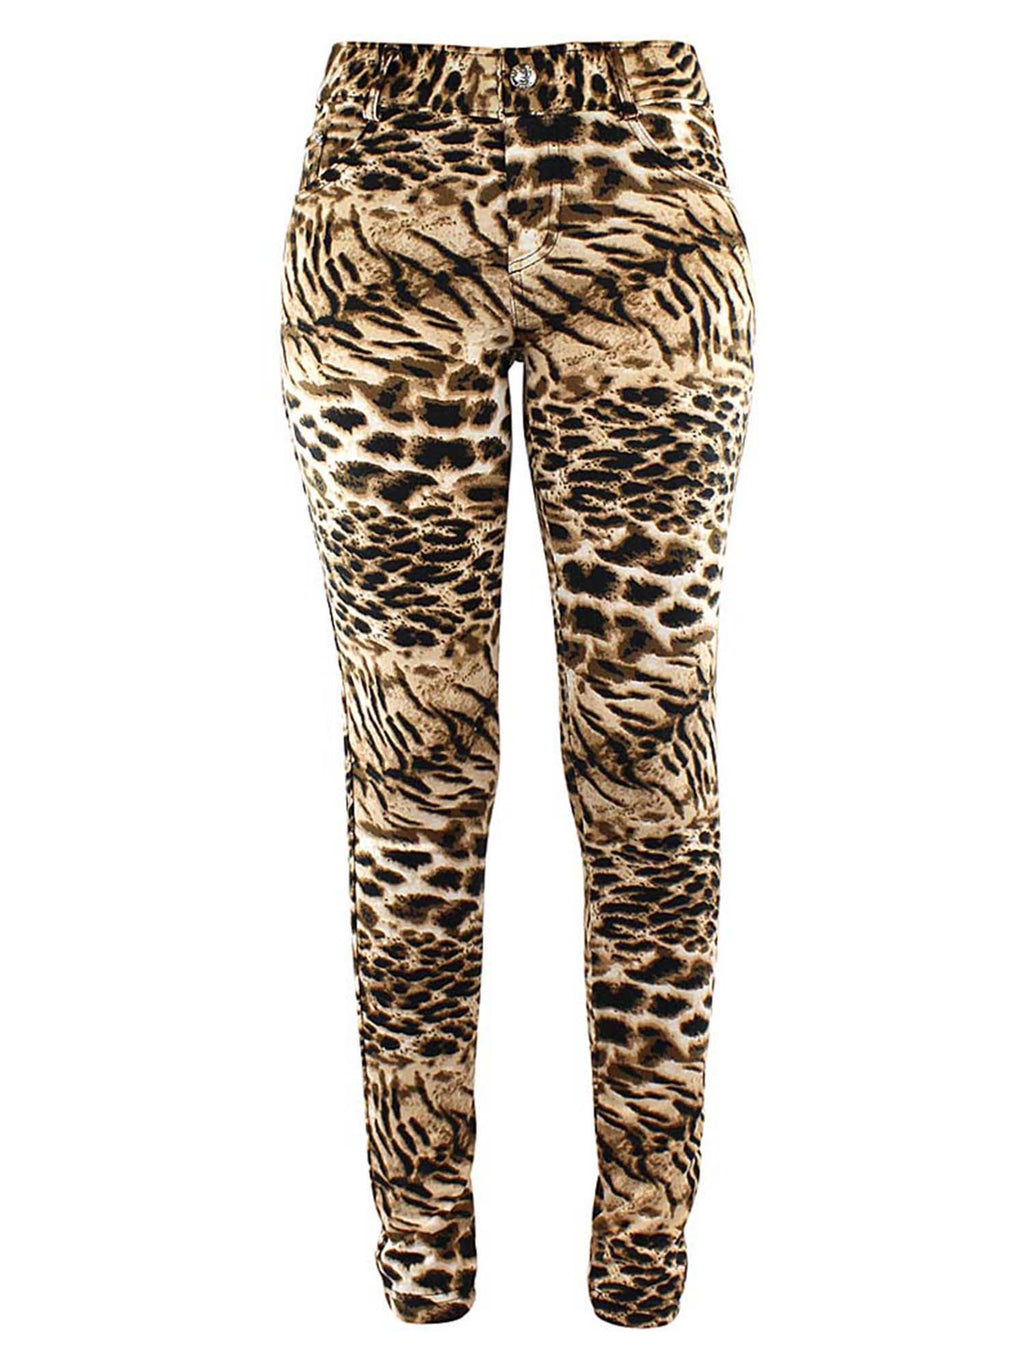 Leopard Print Jeggings With Pockets